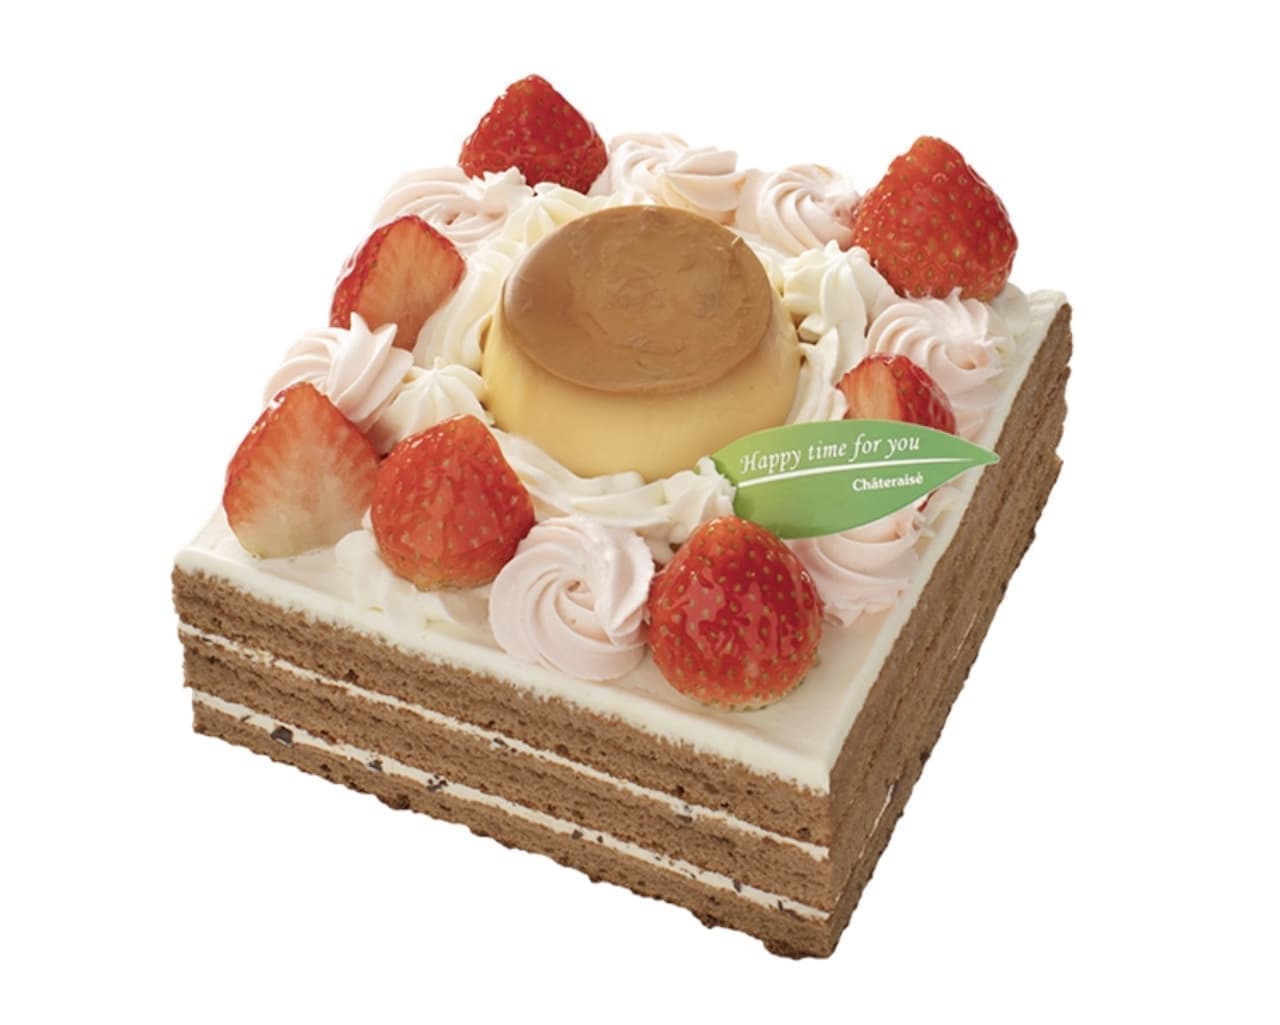 Chateraise "Benihope Strawberry and Pudding Cube Decoration